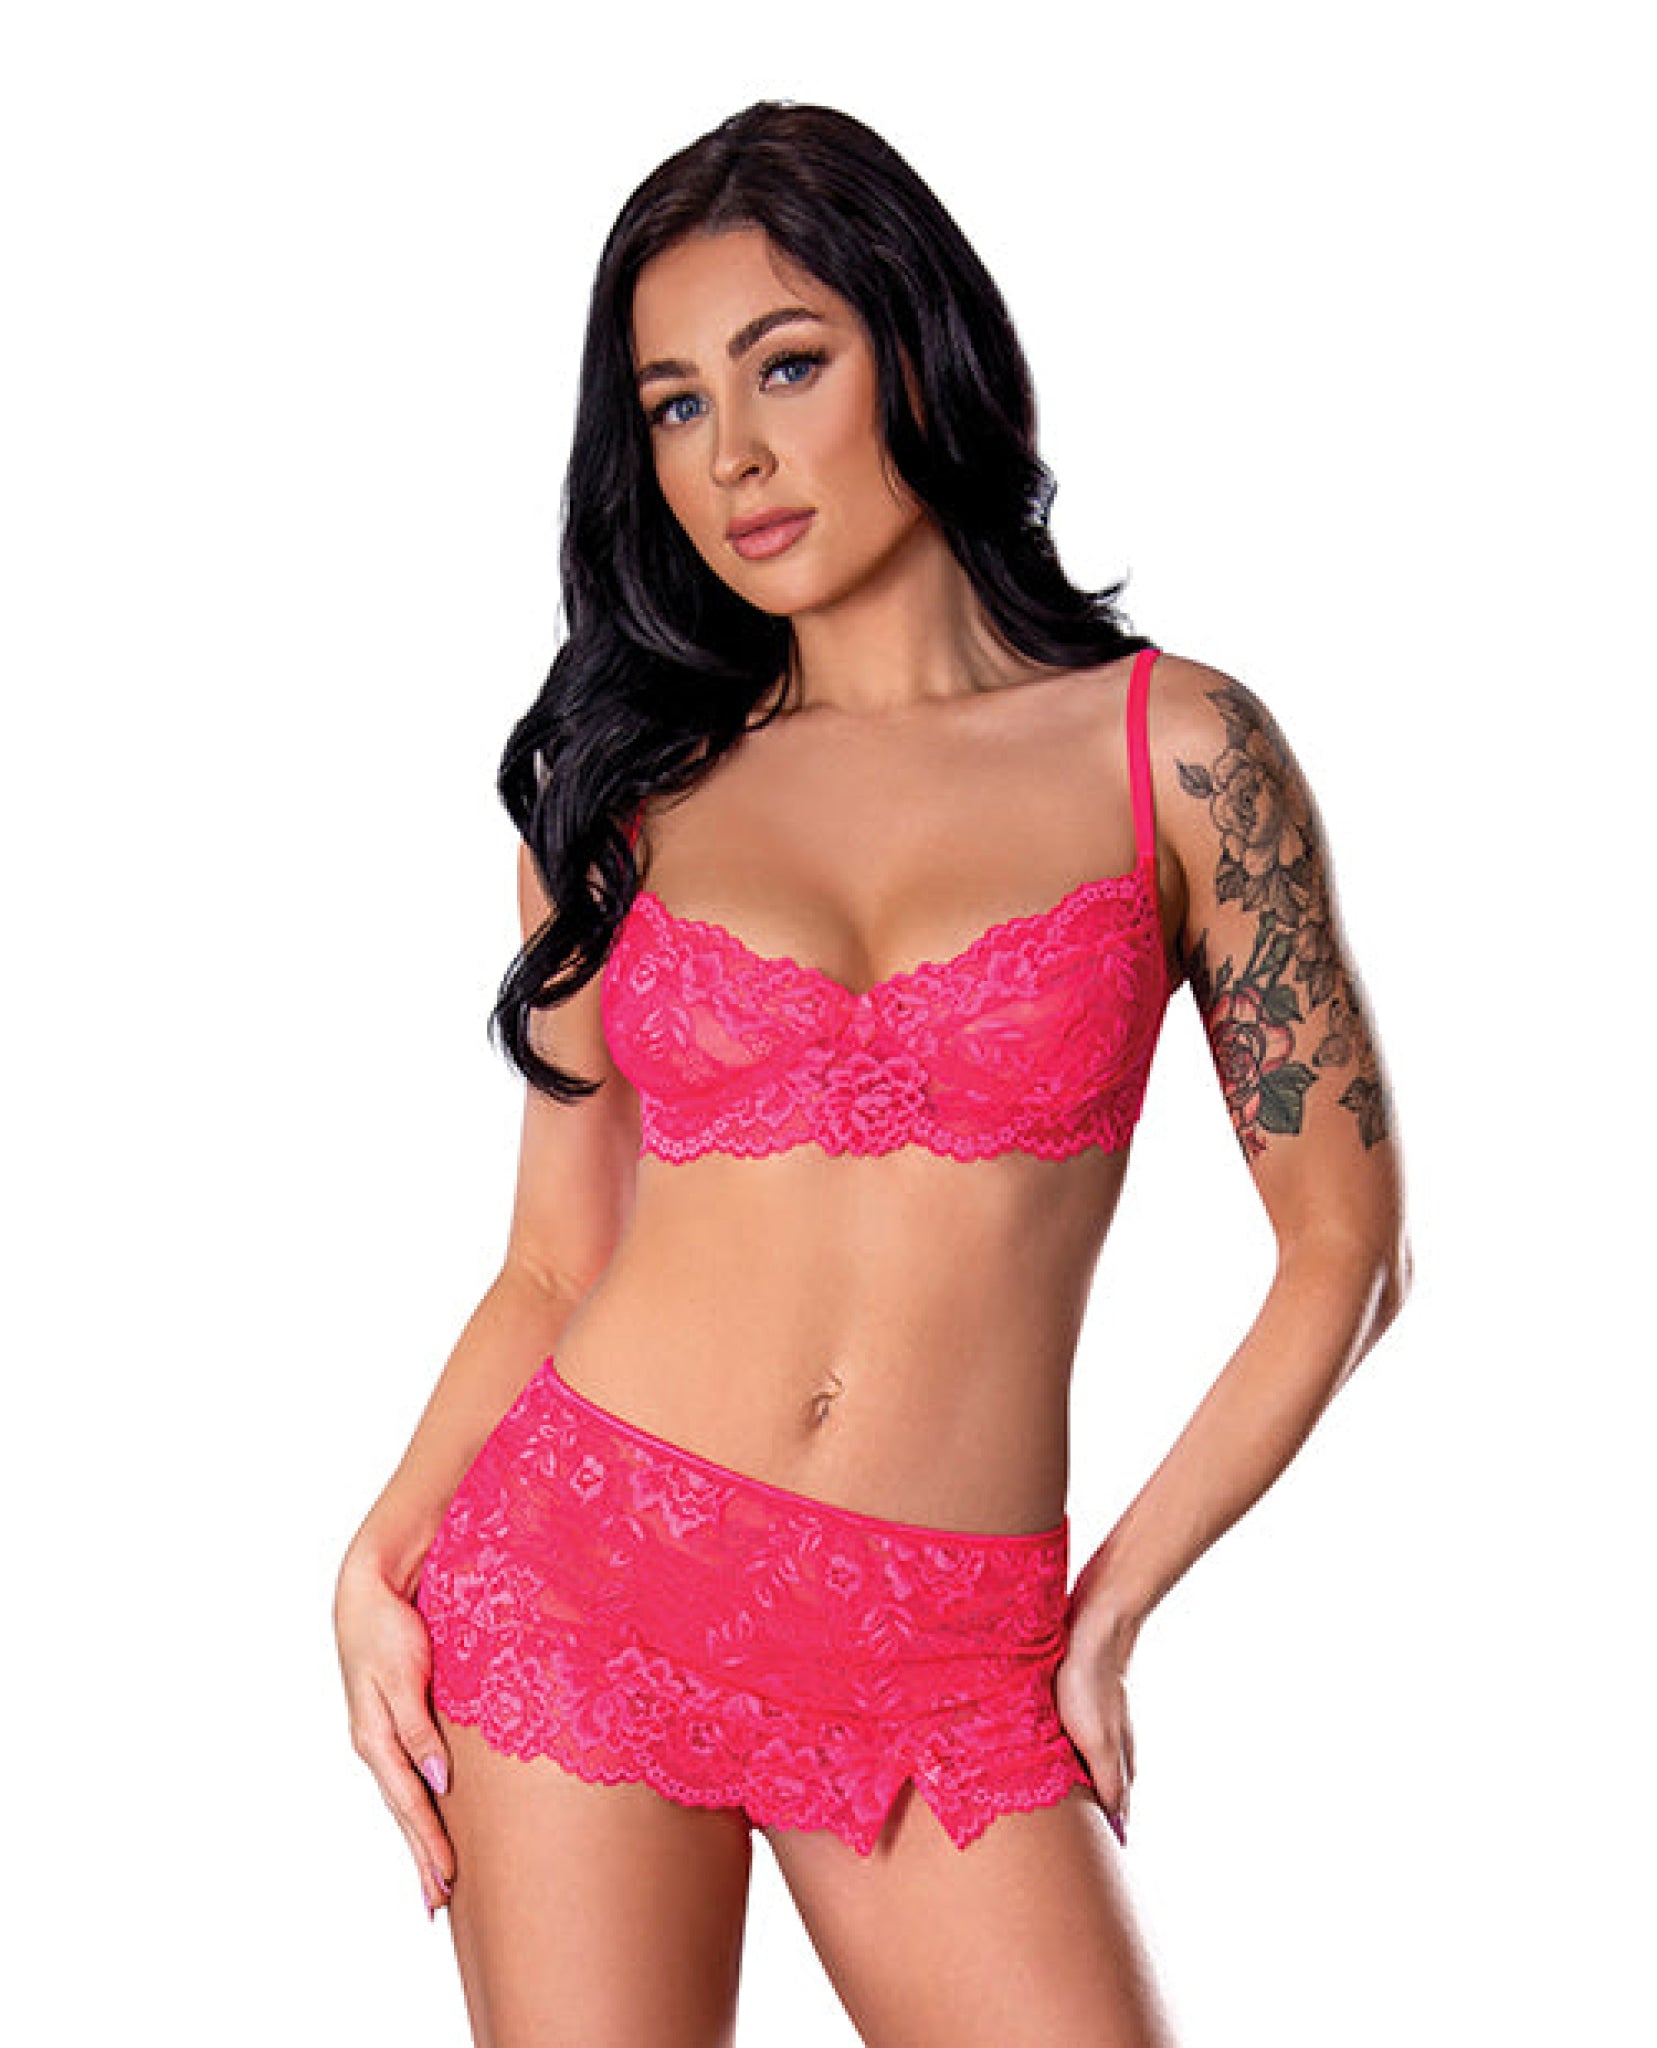 Get It Girl Lace Bra w/Skirt & Thong - Pink Magic Moments Int'l